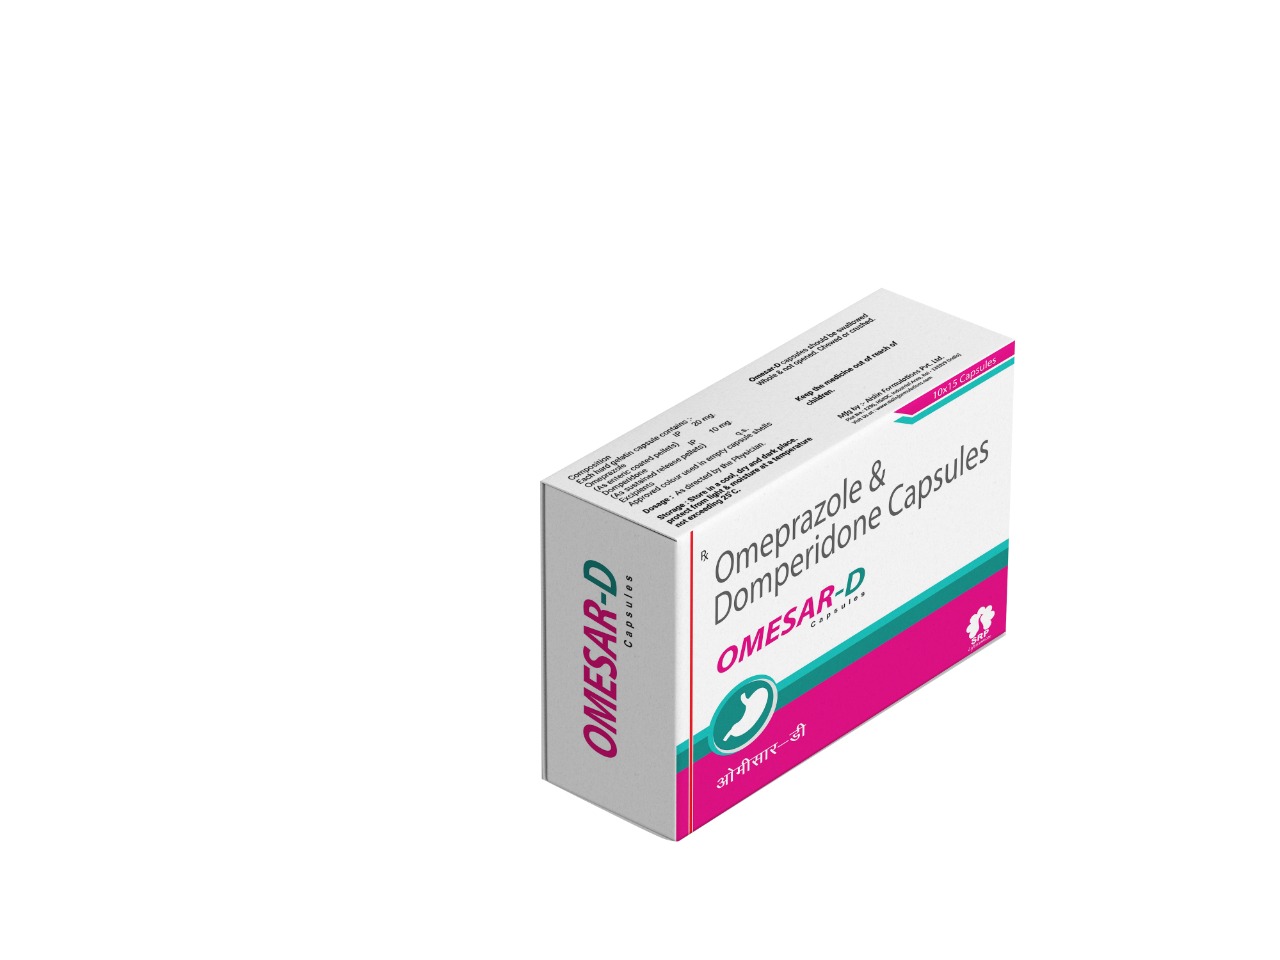 Product Name: OMESAR D, Compositions of OMESAR D are Omeprazole and domperidone capsules - Cynak Healthcare